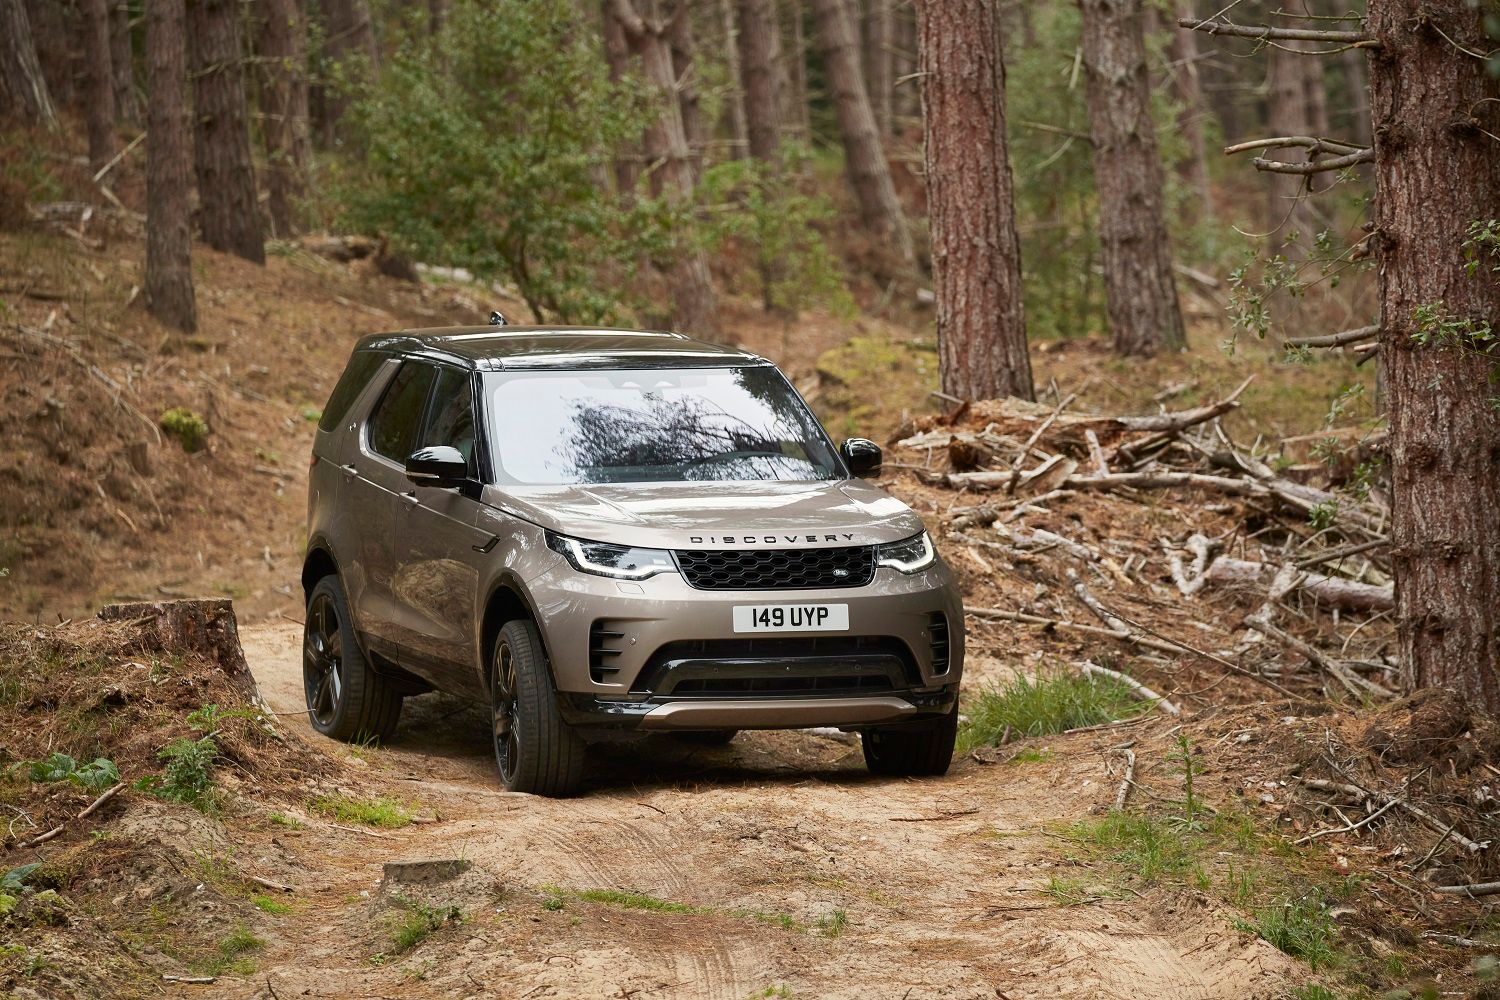 Land Rover Discovery Facelift Launched In India, Priced At Rs 88.06 Lakh